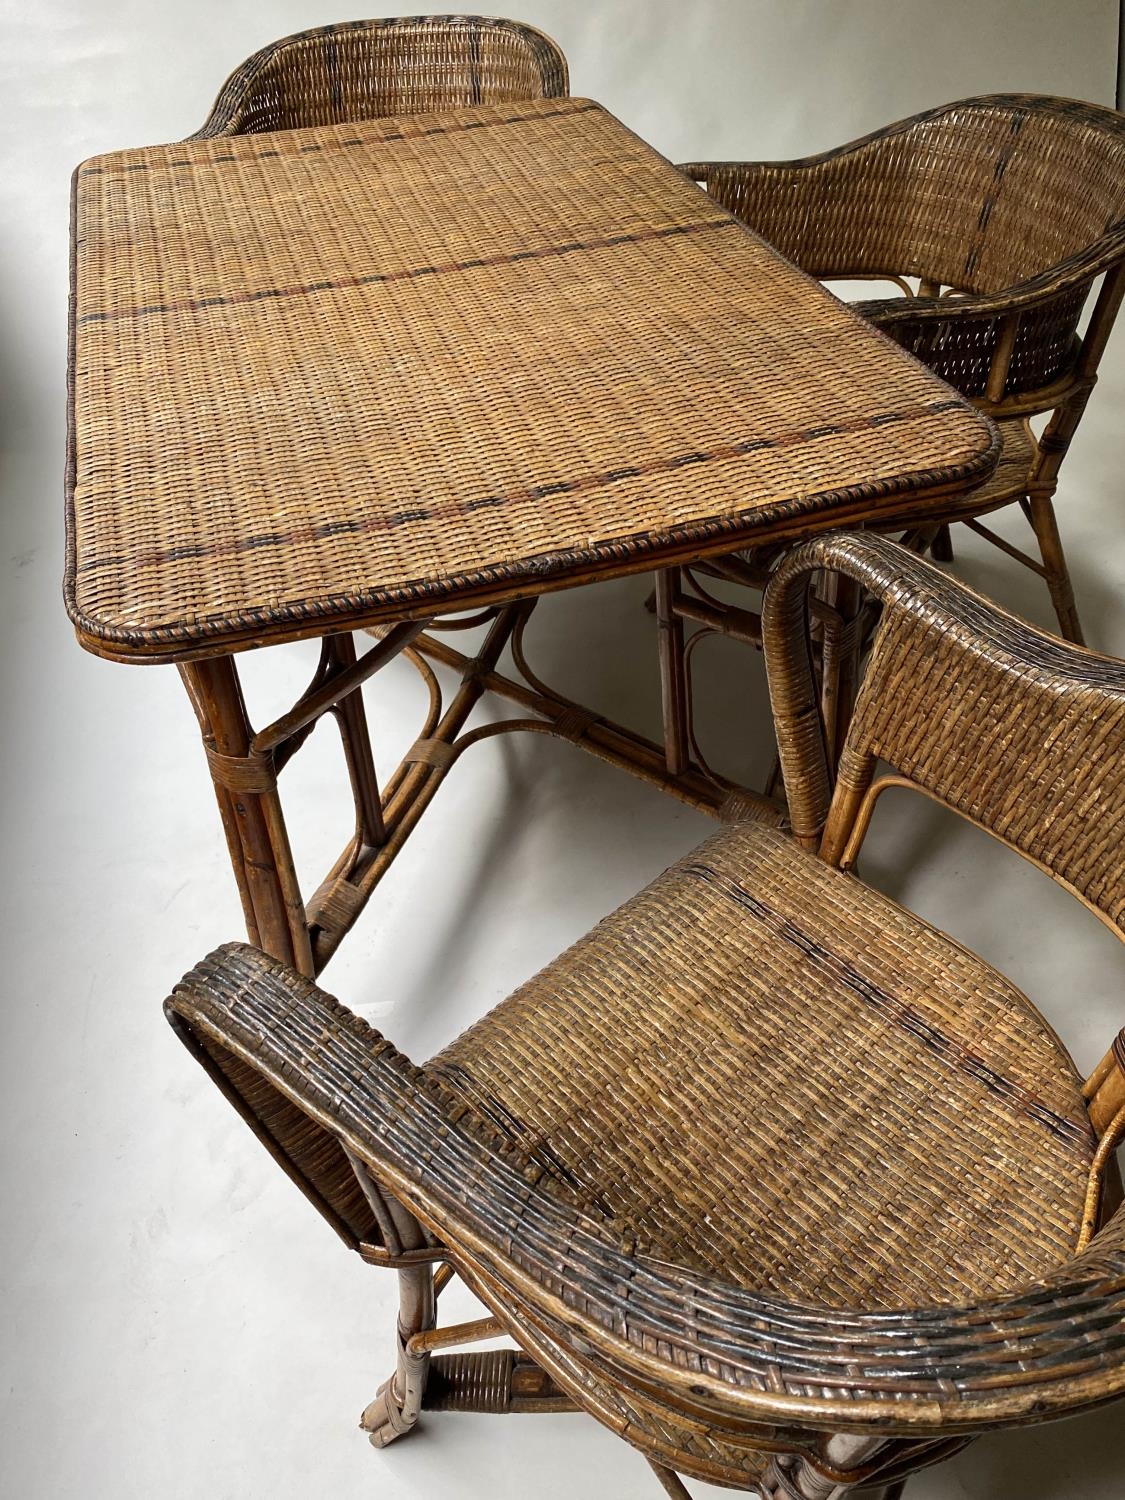 TERRACE TABLE AND CHAIRS, rectangular table 73cm H x 127cm W x 77cm D,vintage, two tone rattan and - Image 2 of 7